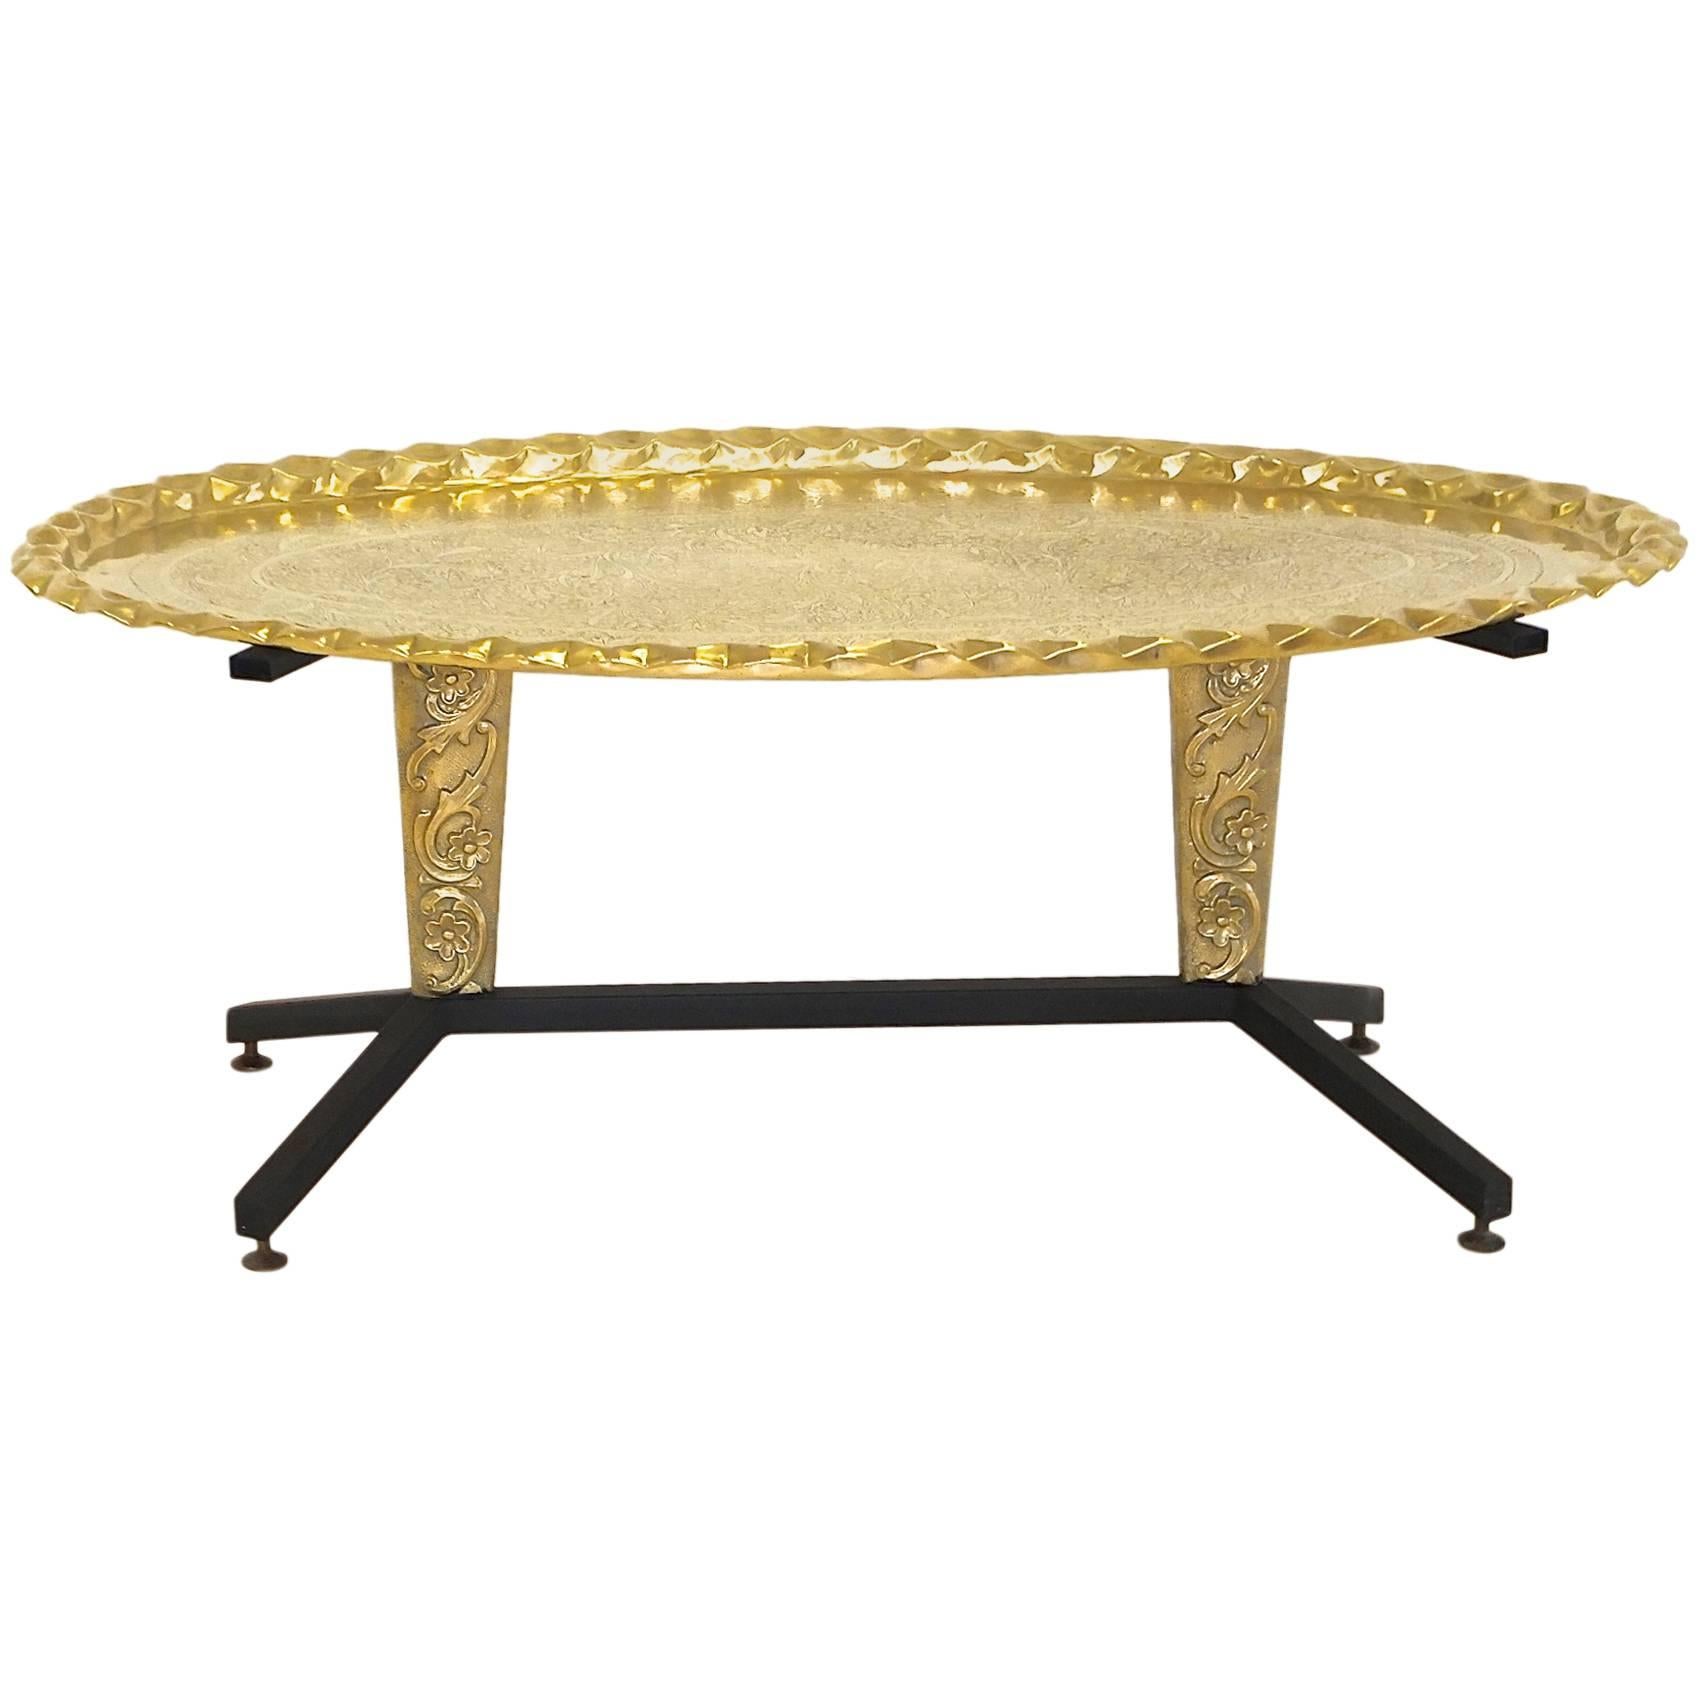 1960s Italian Coffee Table with Elliptical Brass Tray Top